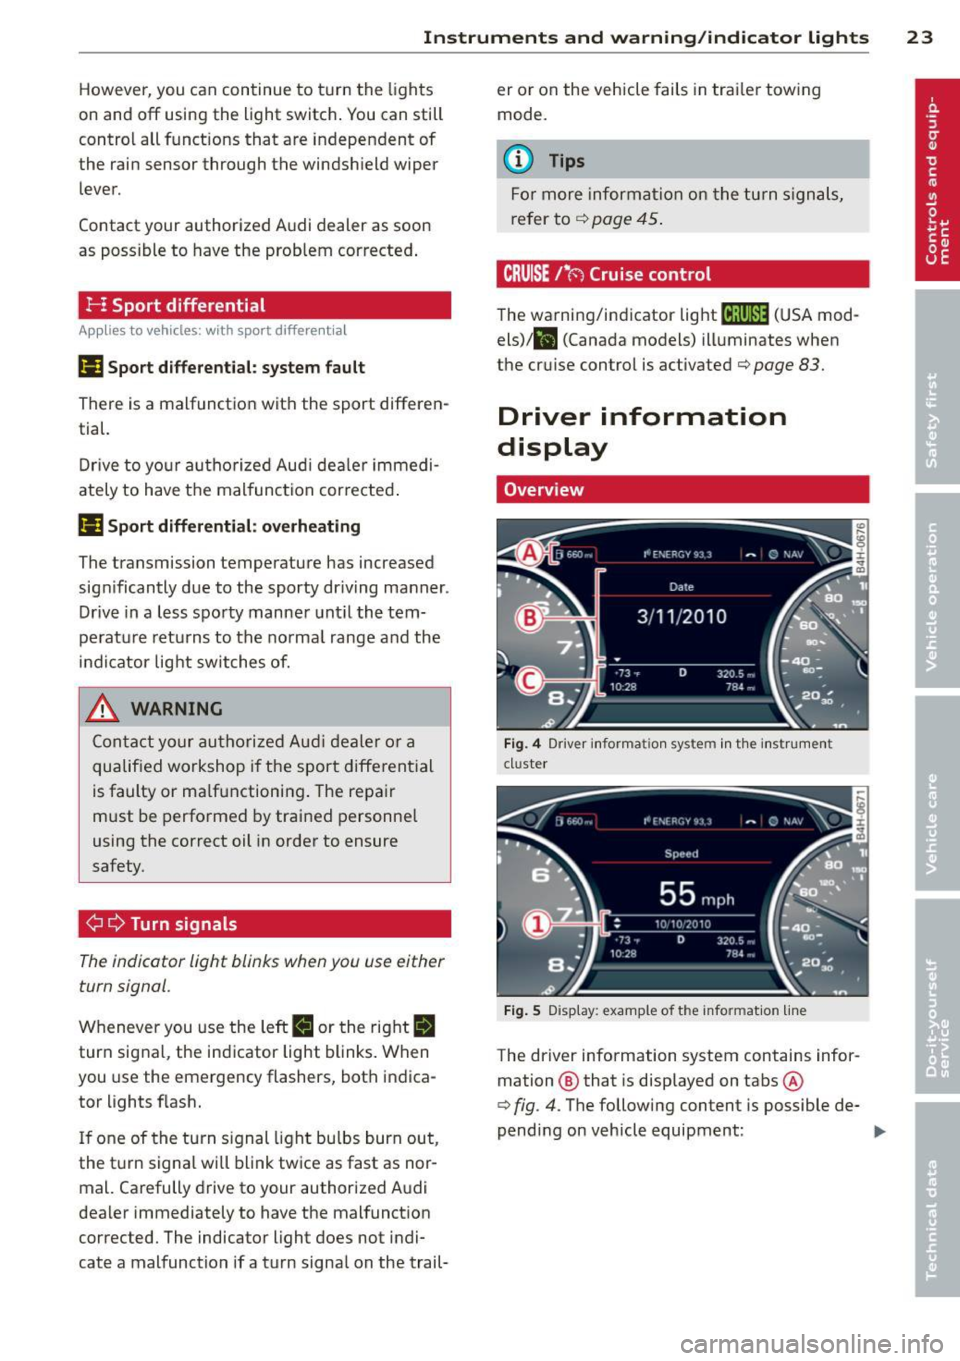 AUDI S7 2013  Owners Manual Instrument s  and  warning /indicator  lights  23 
However, you  can continue  to  turn  the  lights 
on and  off using the  light  switch . You can still 
control  all  funct ions that  are  independ